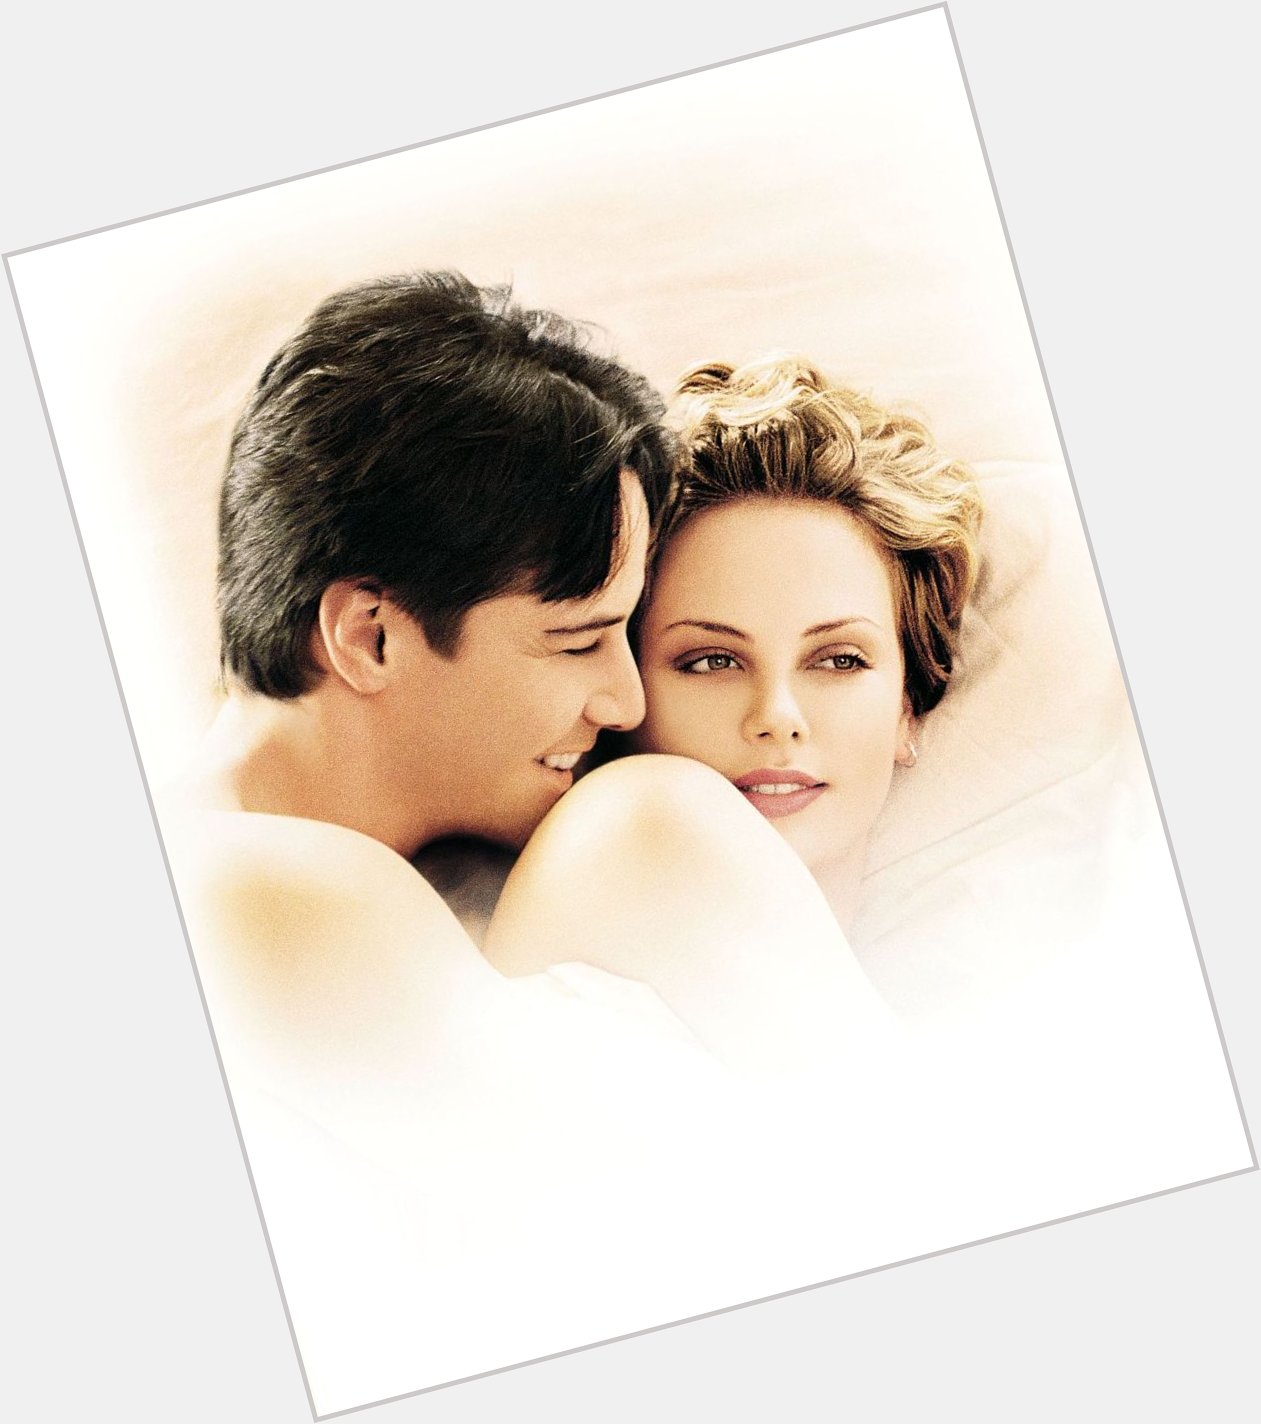 Happy Birthday Charlize Theron(August 7, 1975, Benoni, South Africa) here with Keanu Reeves in Sweet November (2001) 